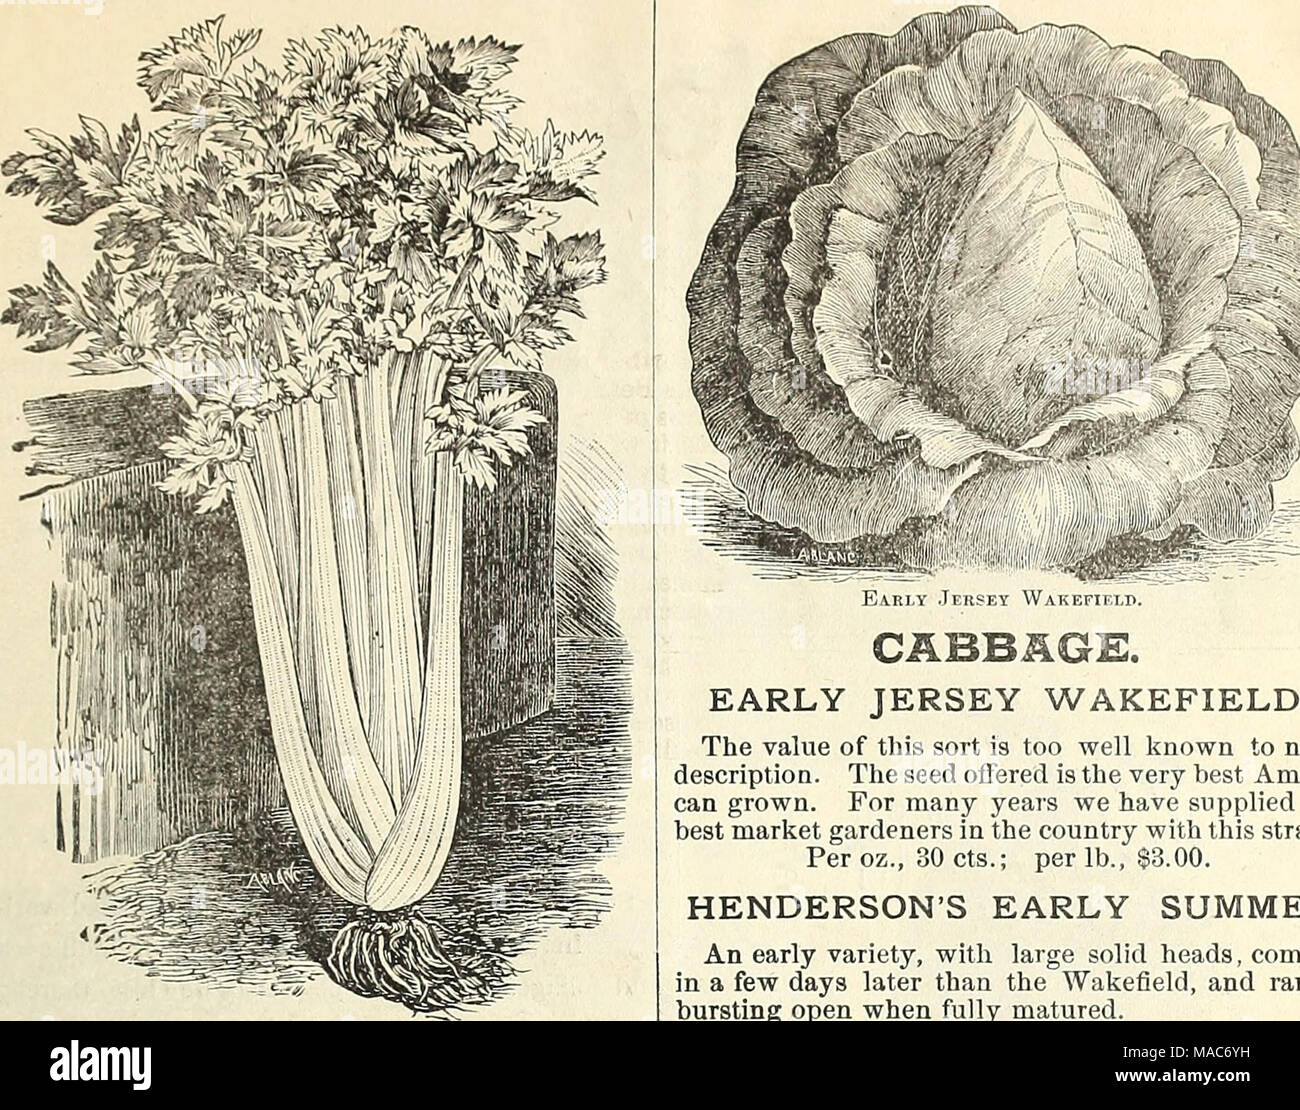 . Dreer's quarterly wholesale list for florists and market gardeners . Golden Selj-Blanchino Celeby. GOLDEN SELF-BLANCHING CELERY. One of the best varieties for the market gardener. Of upright, compact habit, and requiring little labor to blanch. The heart is a rich gold yellow, while tbe outer leaves are a yellowish white. It is an ex- cellent keeper and of rich, nutty flavor. Pkt., lOcts.; oz., 60cts.; { lb., $2.00. NEW ROSE CELERY. In this variety we have a combination of the best qualities of Celery. The red sorts far surpass the white in flavor and possess in their coloring a feature whic Stock Photo